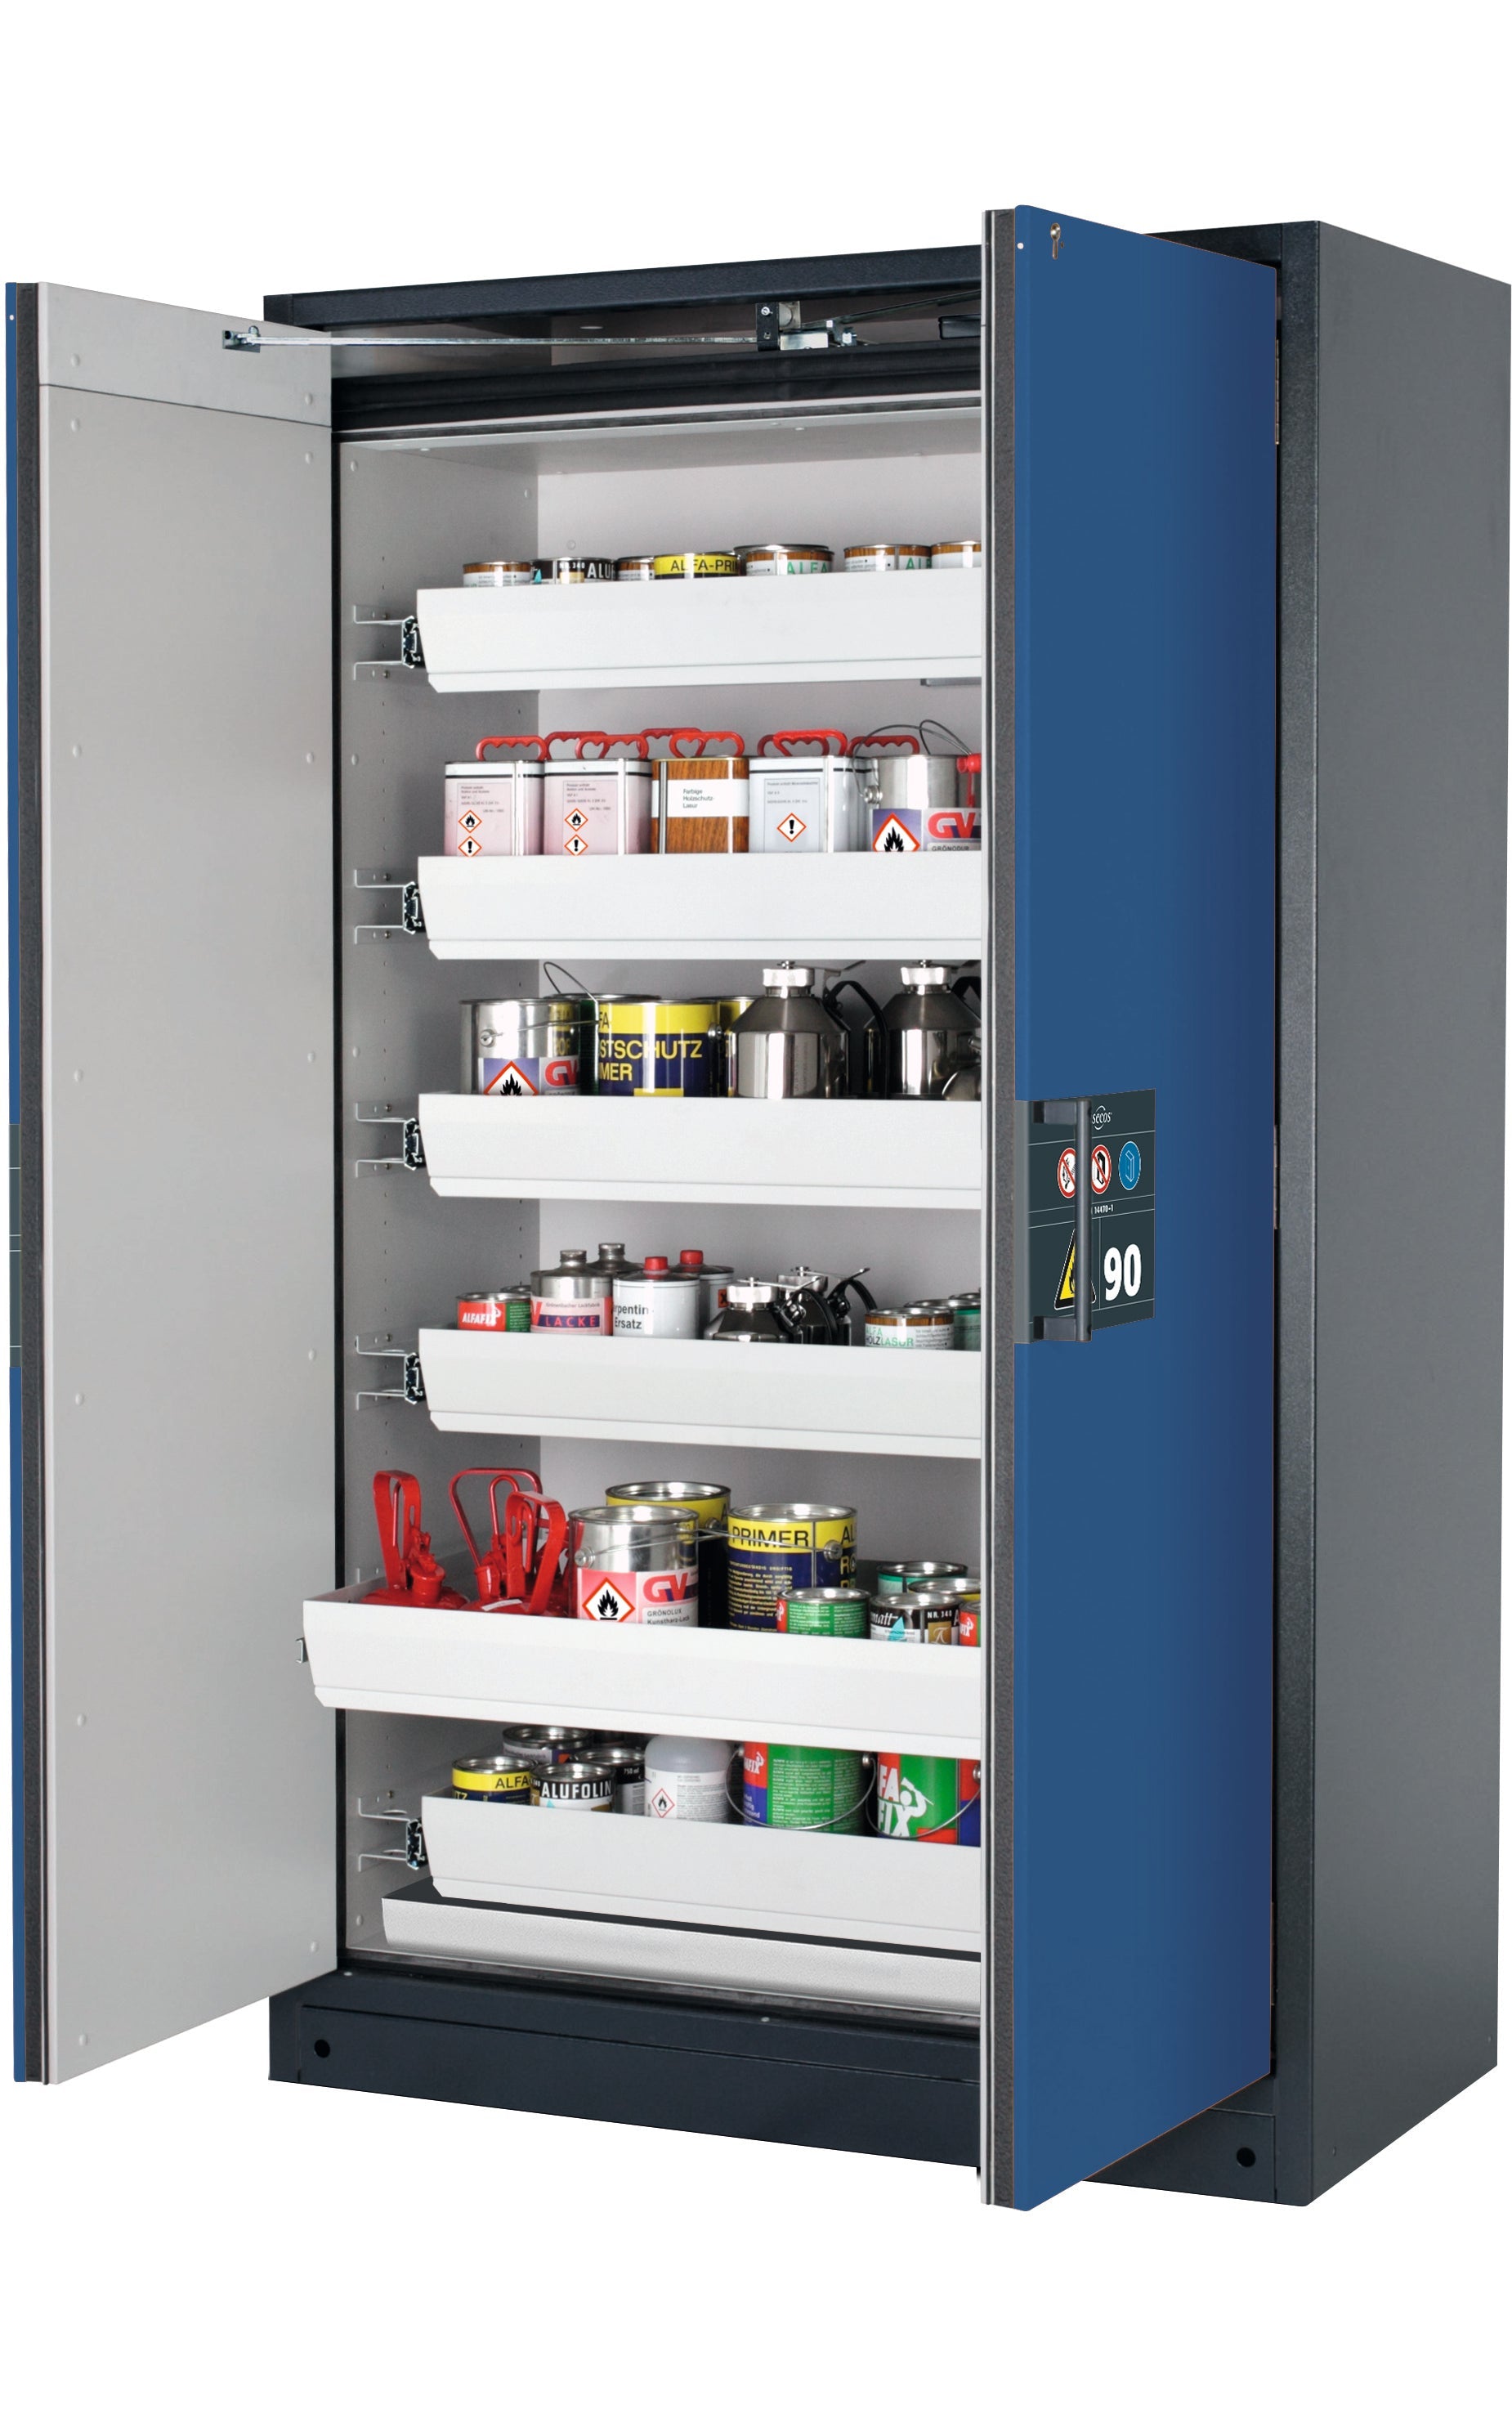 Type 90 safety storage cabinet Q-PEGASUS-90 model Q90.195.120.WDAC in gentian blue RAL 5010 with 6x drawer (standard) (sheet steel),